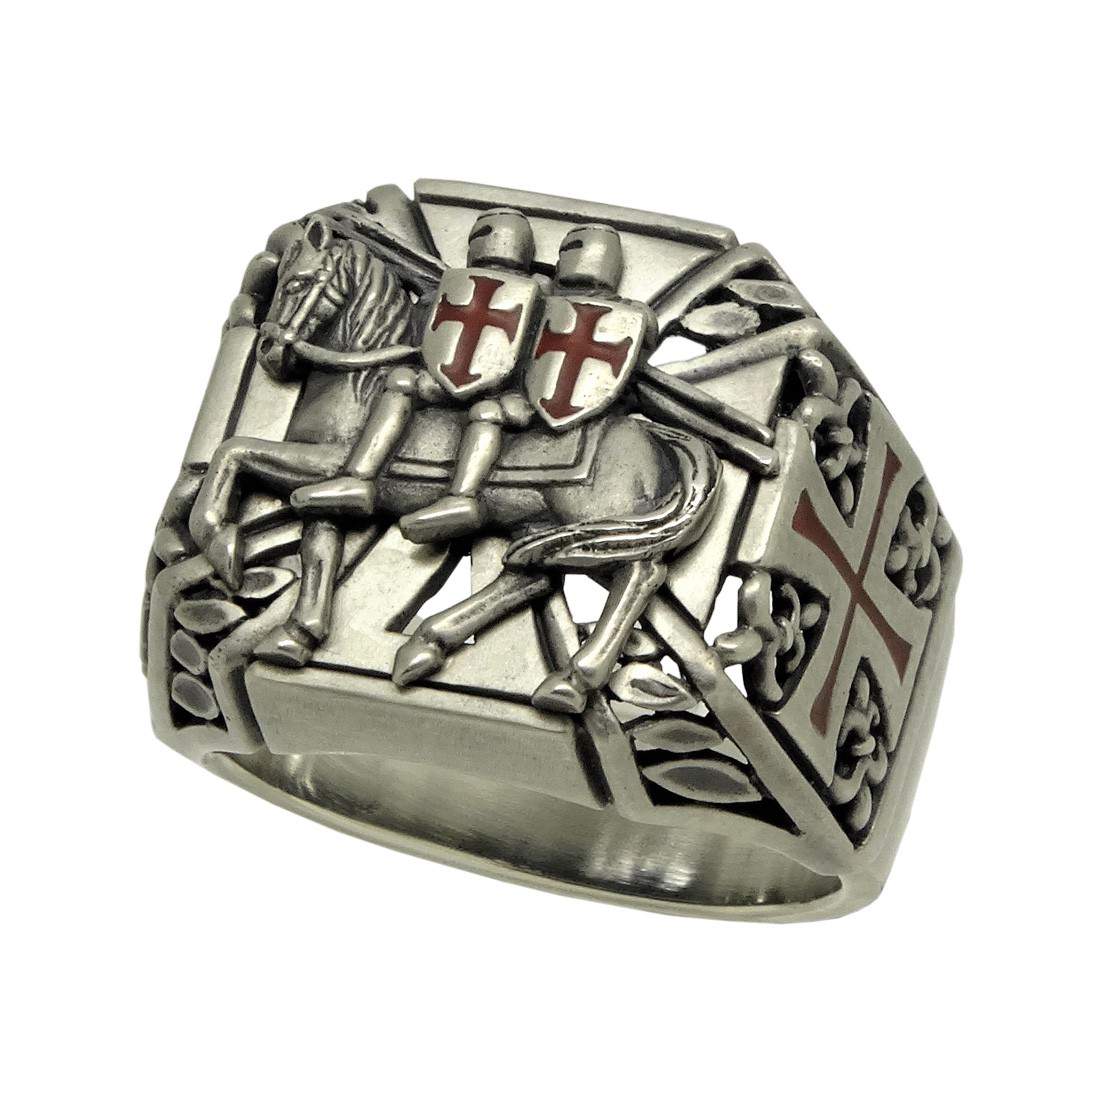 Knights Templar Soldiers of Christ Masonic Ring Cross Stainless Steel 